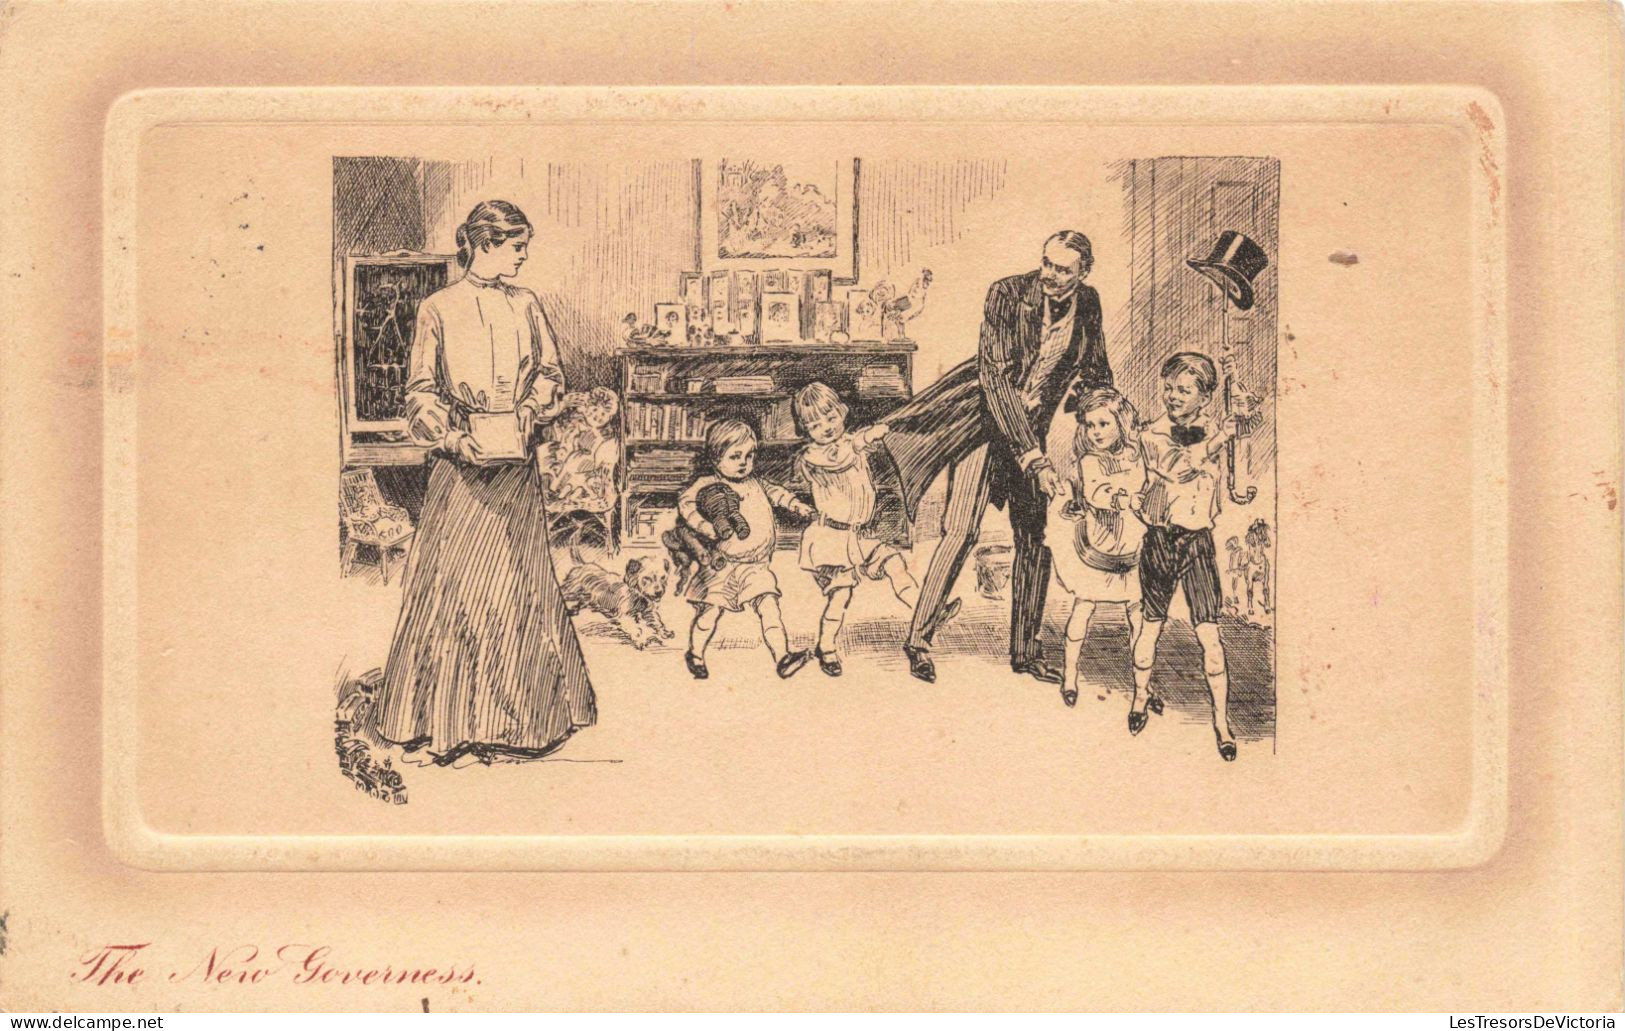 ILLUSTRATION NON SIGNE - The New Governess - Carte Postale Ancienne - Ante 1900